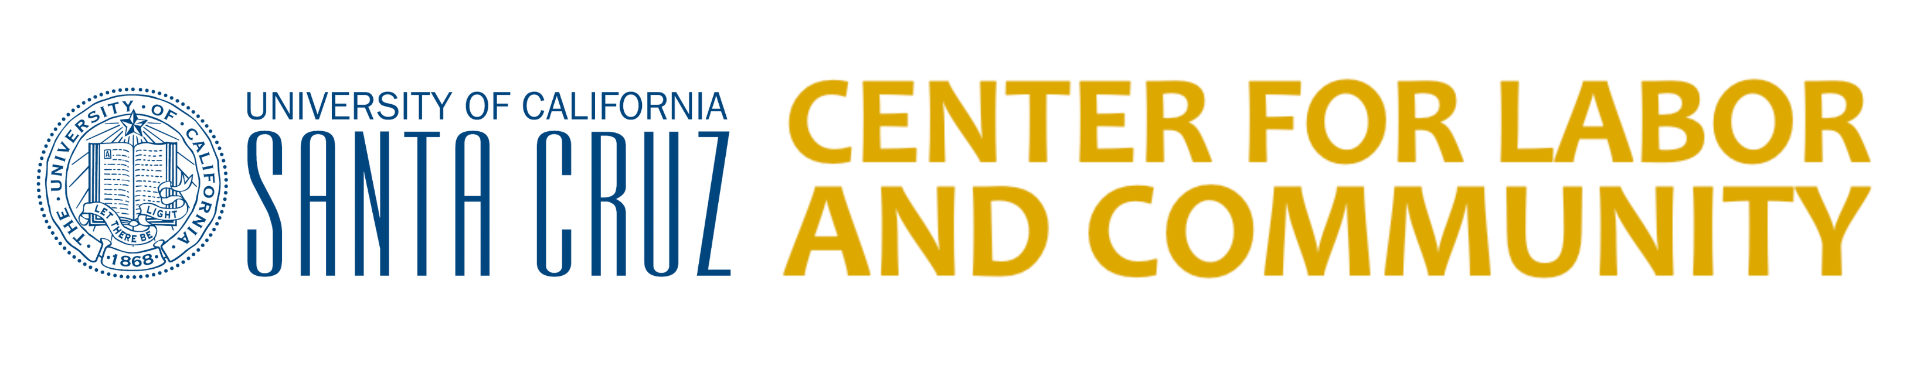 Center for Labor and Community Logo